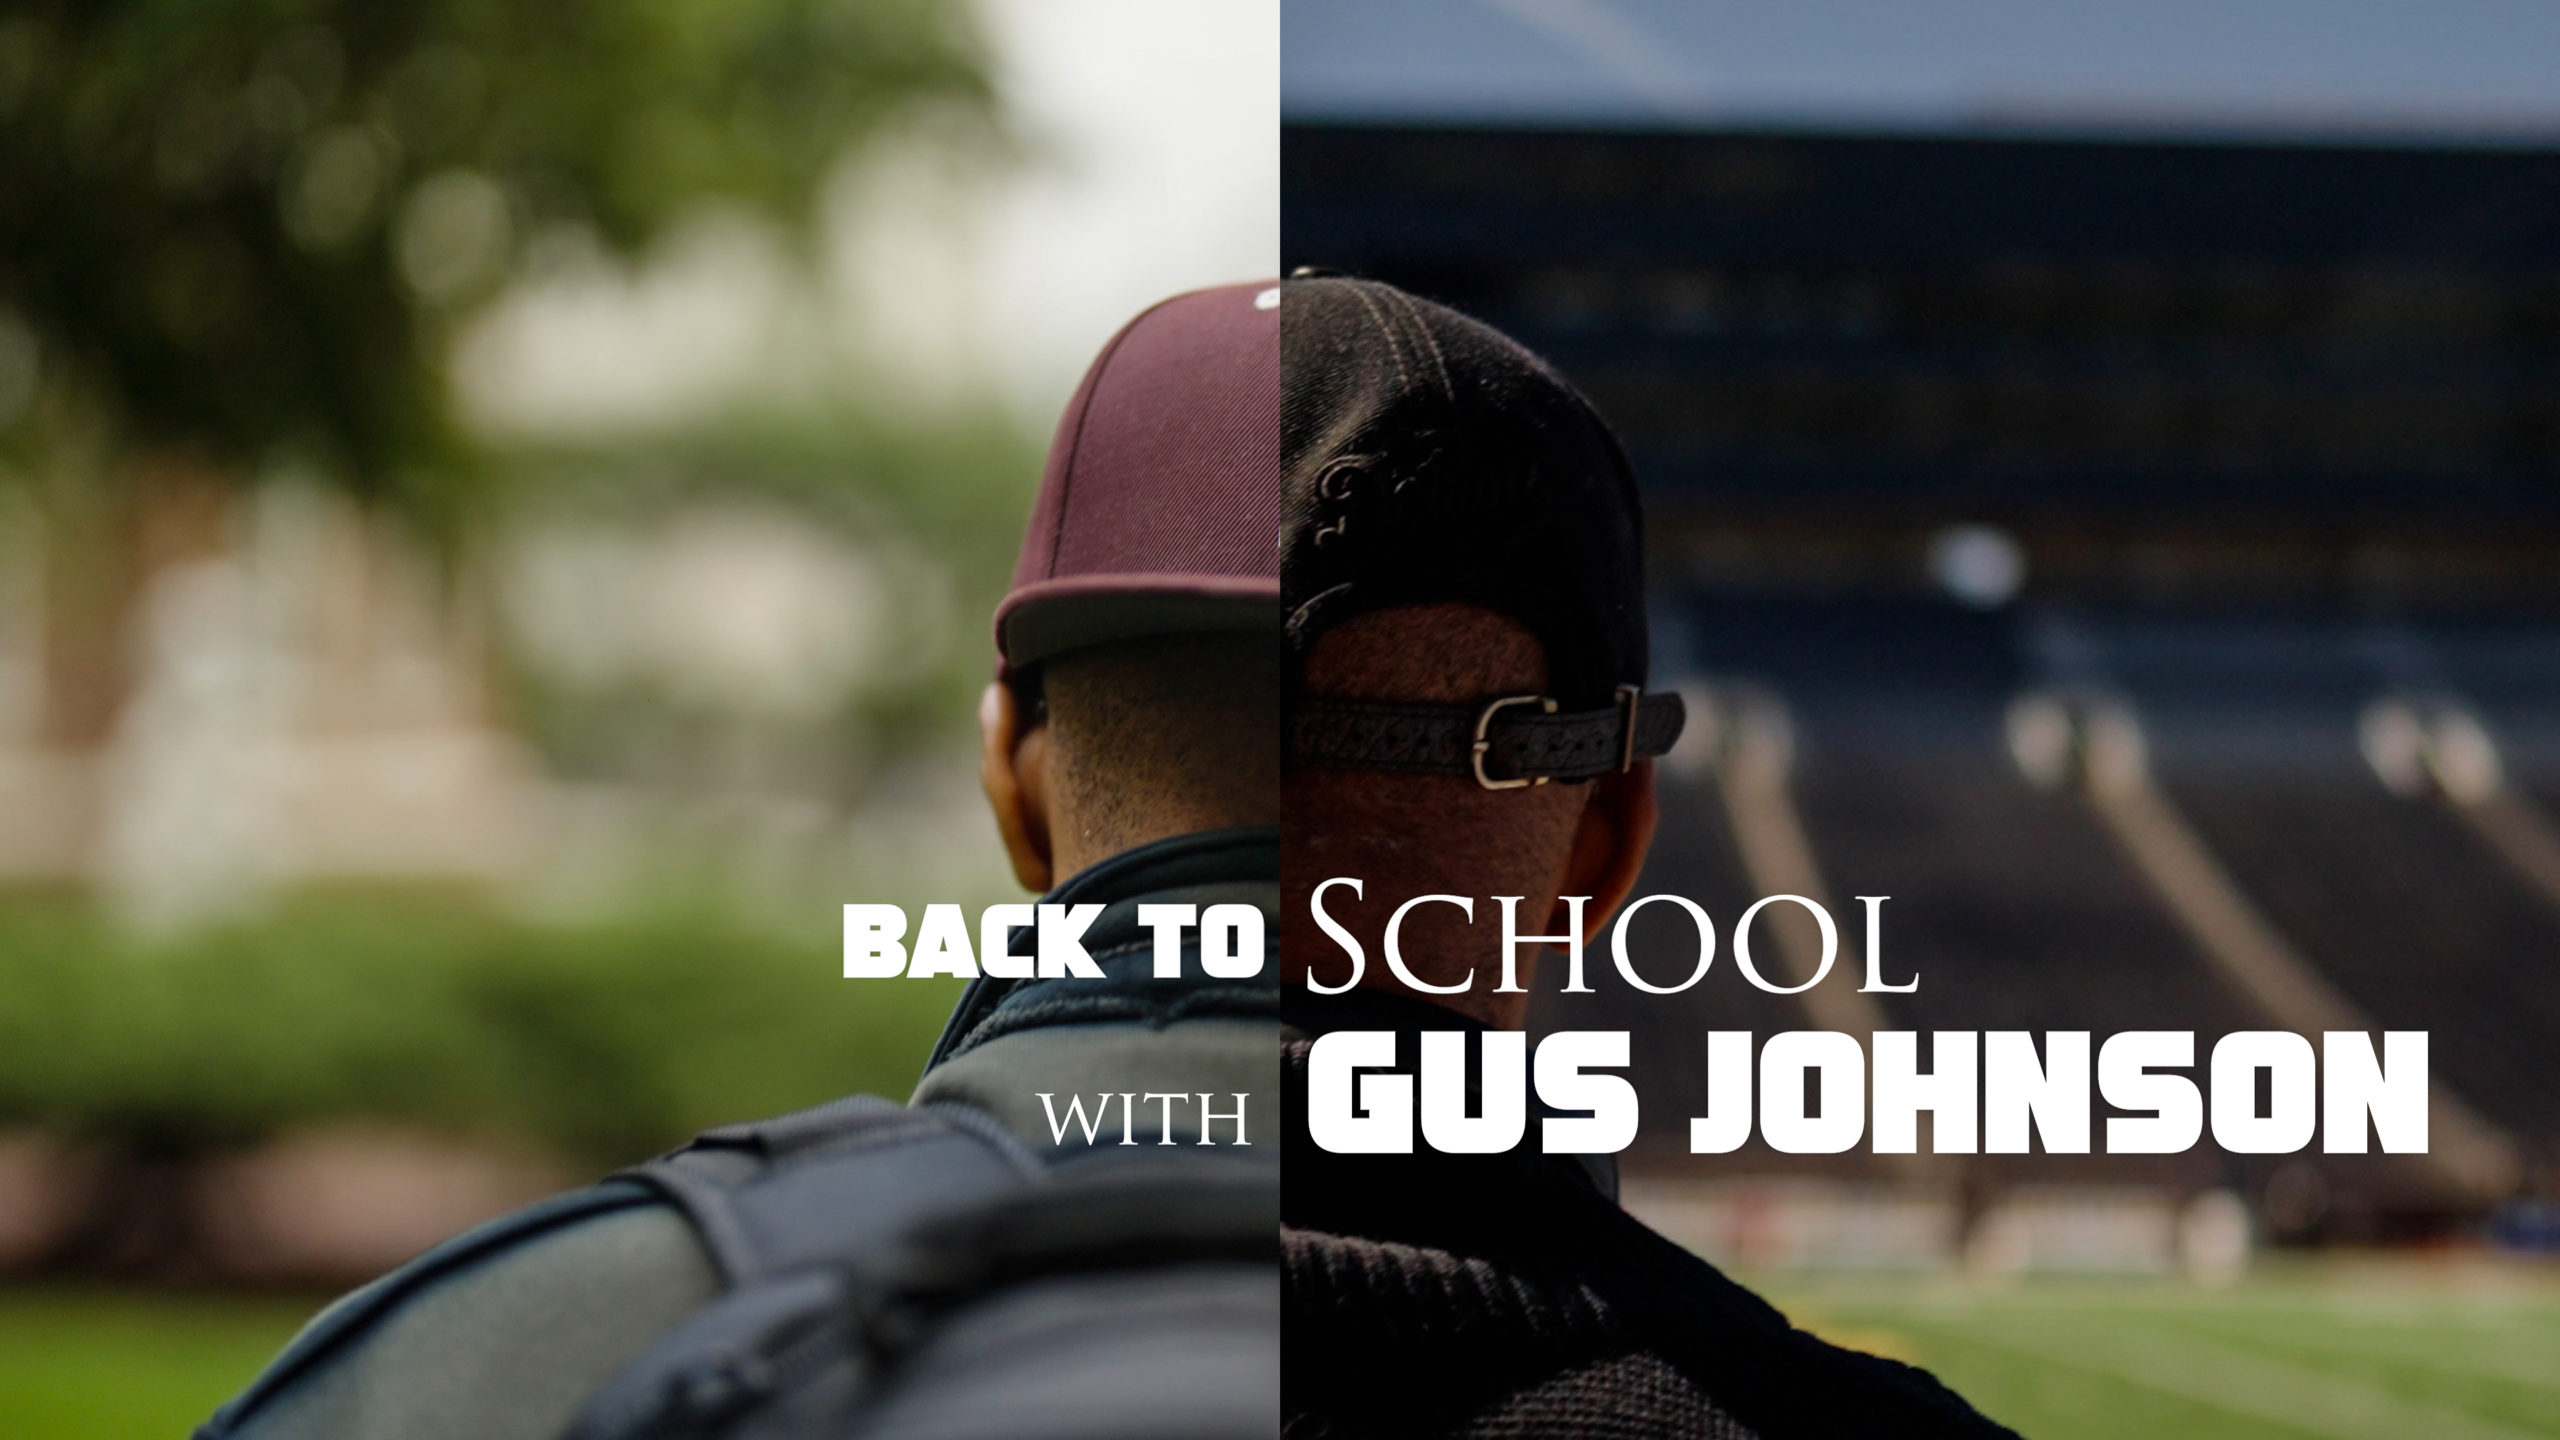 FOX SPORTS FILMS PRESENTS BACK TO SCHOOL WITH  GUS JOHNSON PREMIERING SATURDAY, FEBRUARY 18 ON FOX